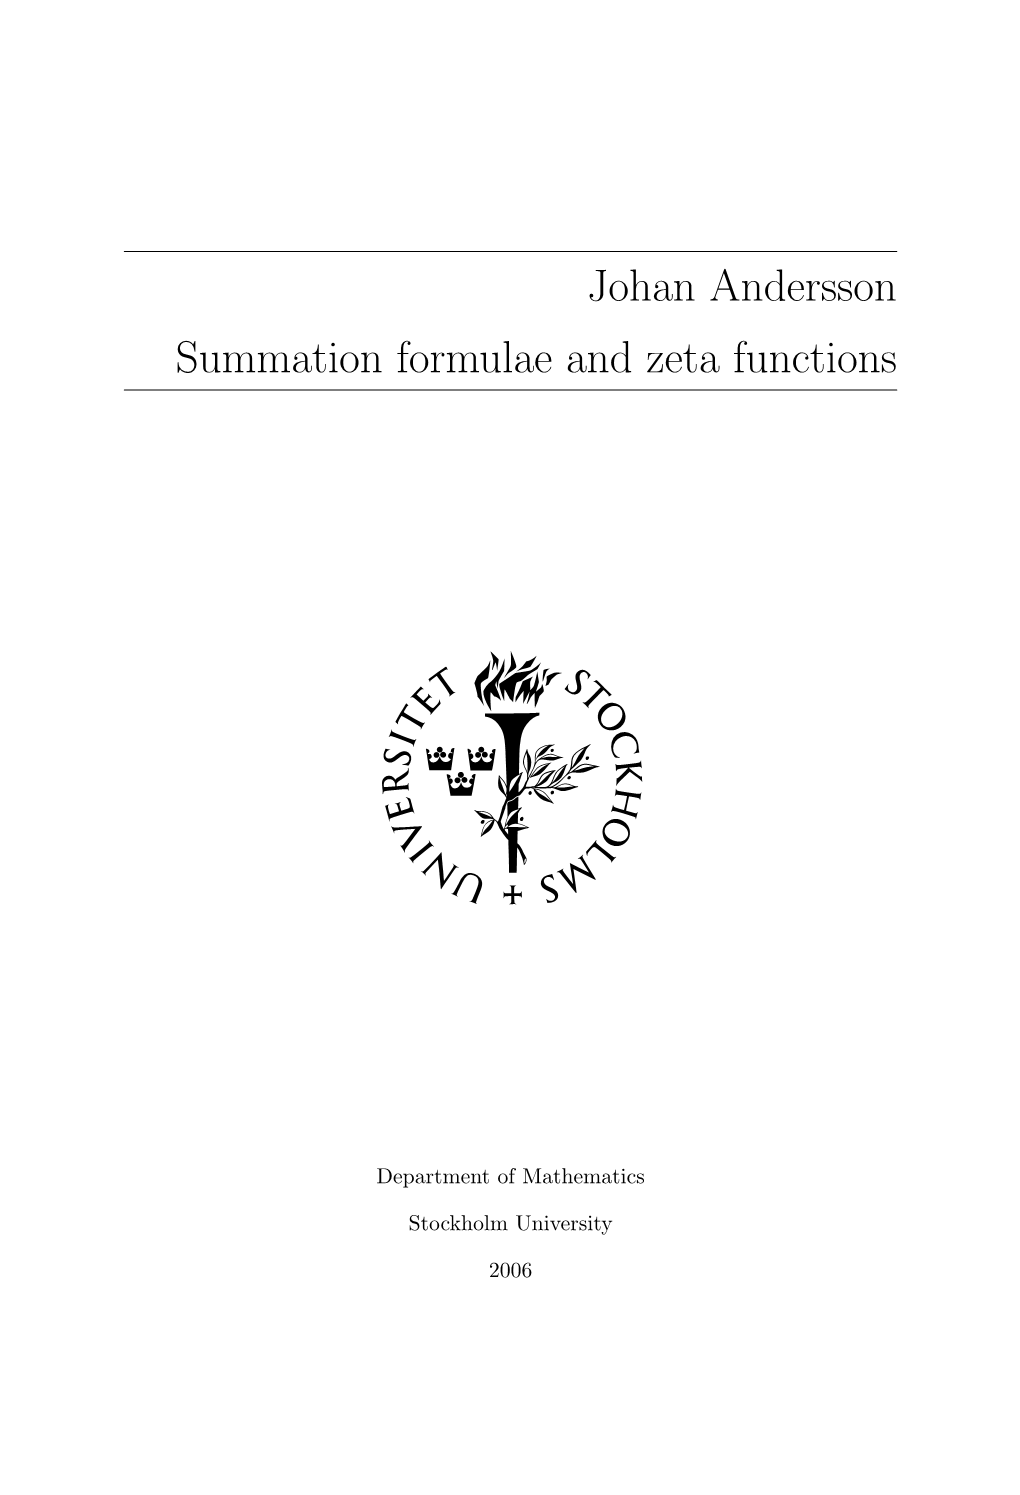 Johan Andersson Summation Formulae and Zeta Functions